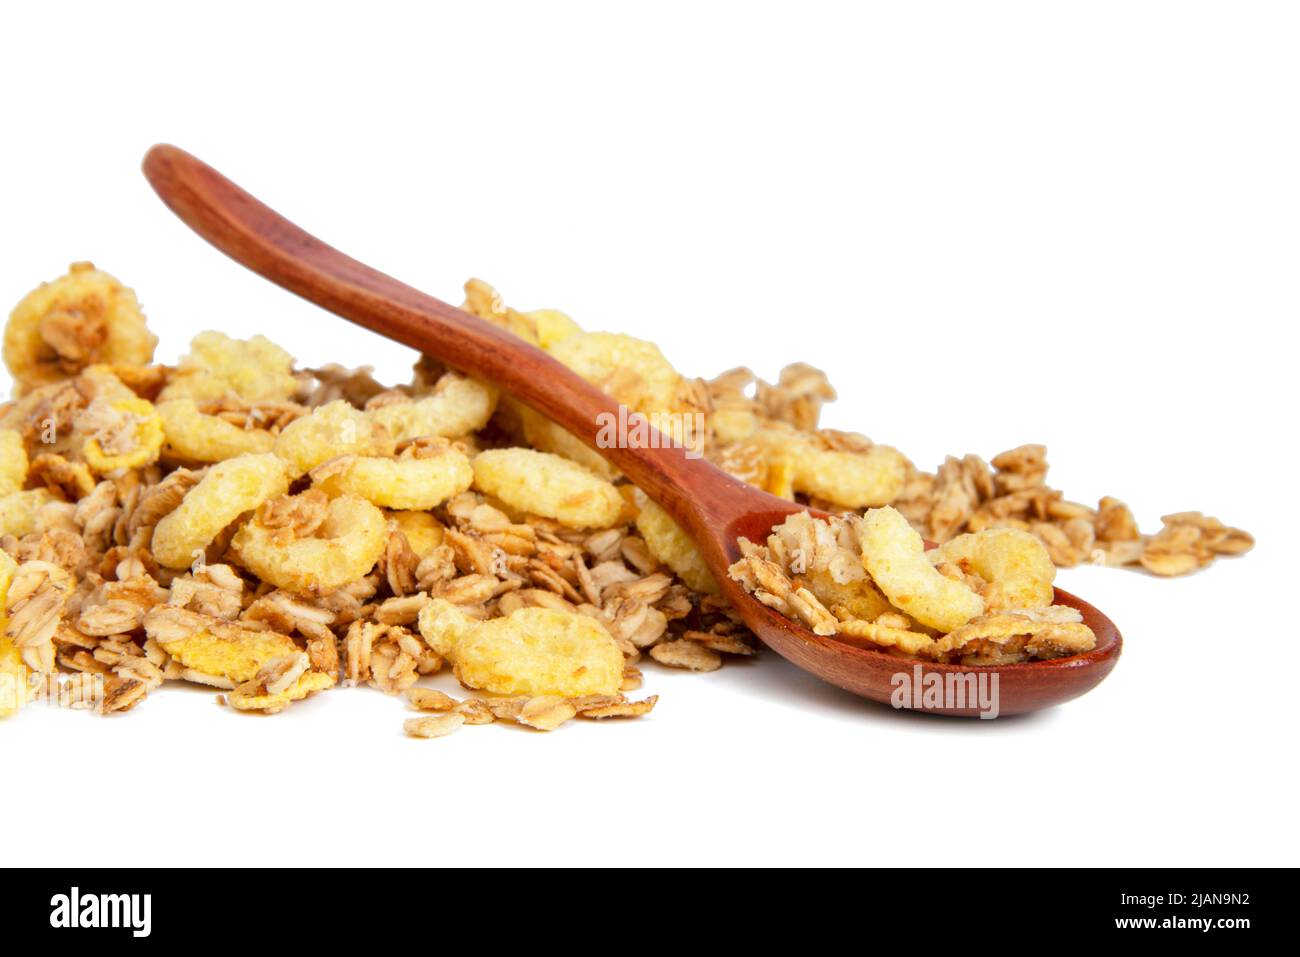 Oatmeal cereal breakfast in wooden spoon isolated on the white background Stock Photo